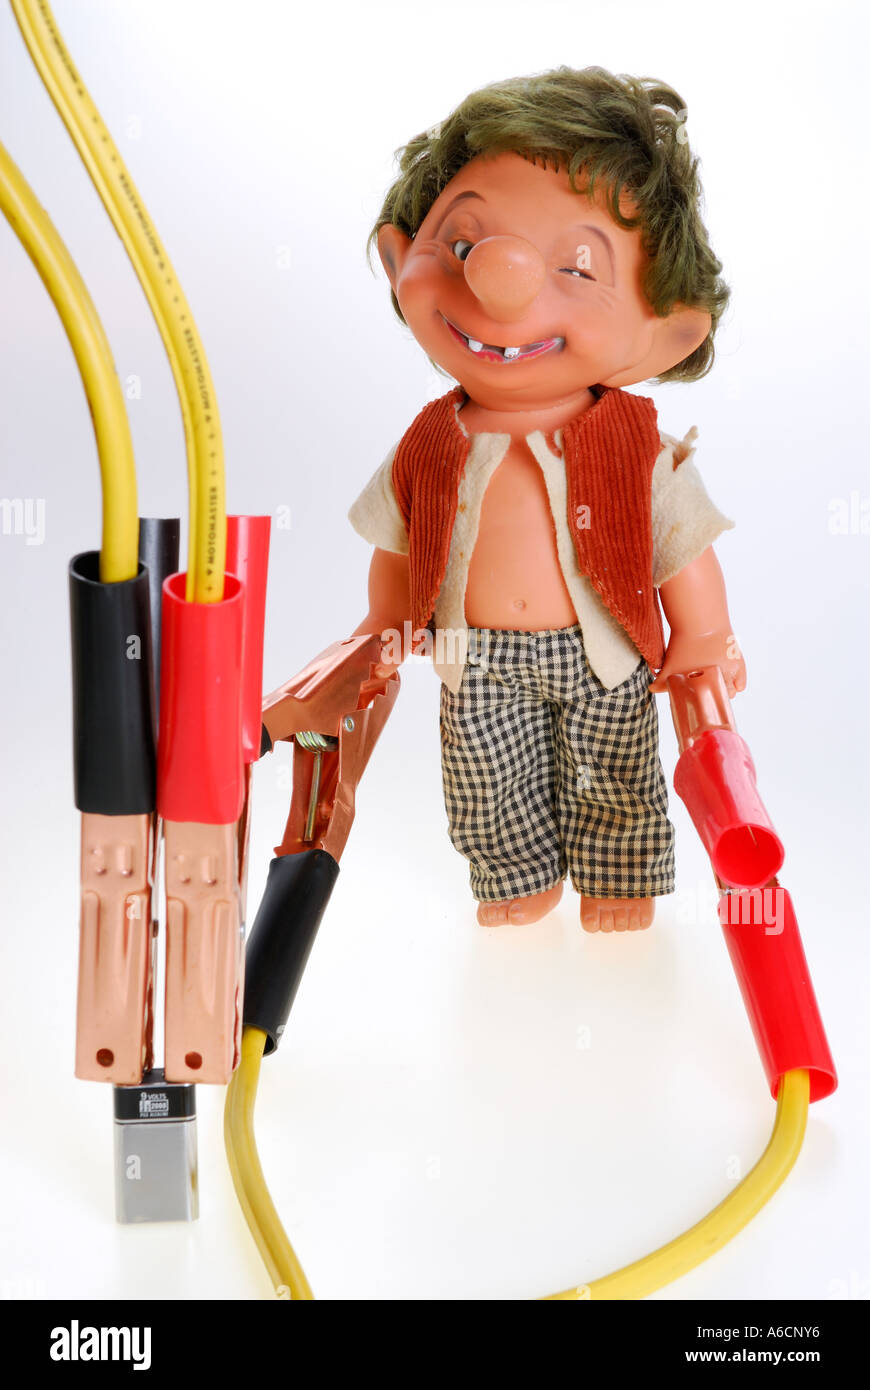 Mad doll manikin connected to a battery by jumper cables for thrills Stock Photo